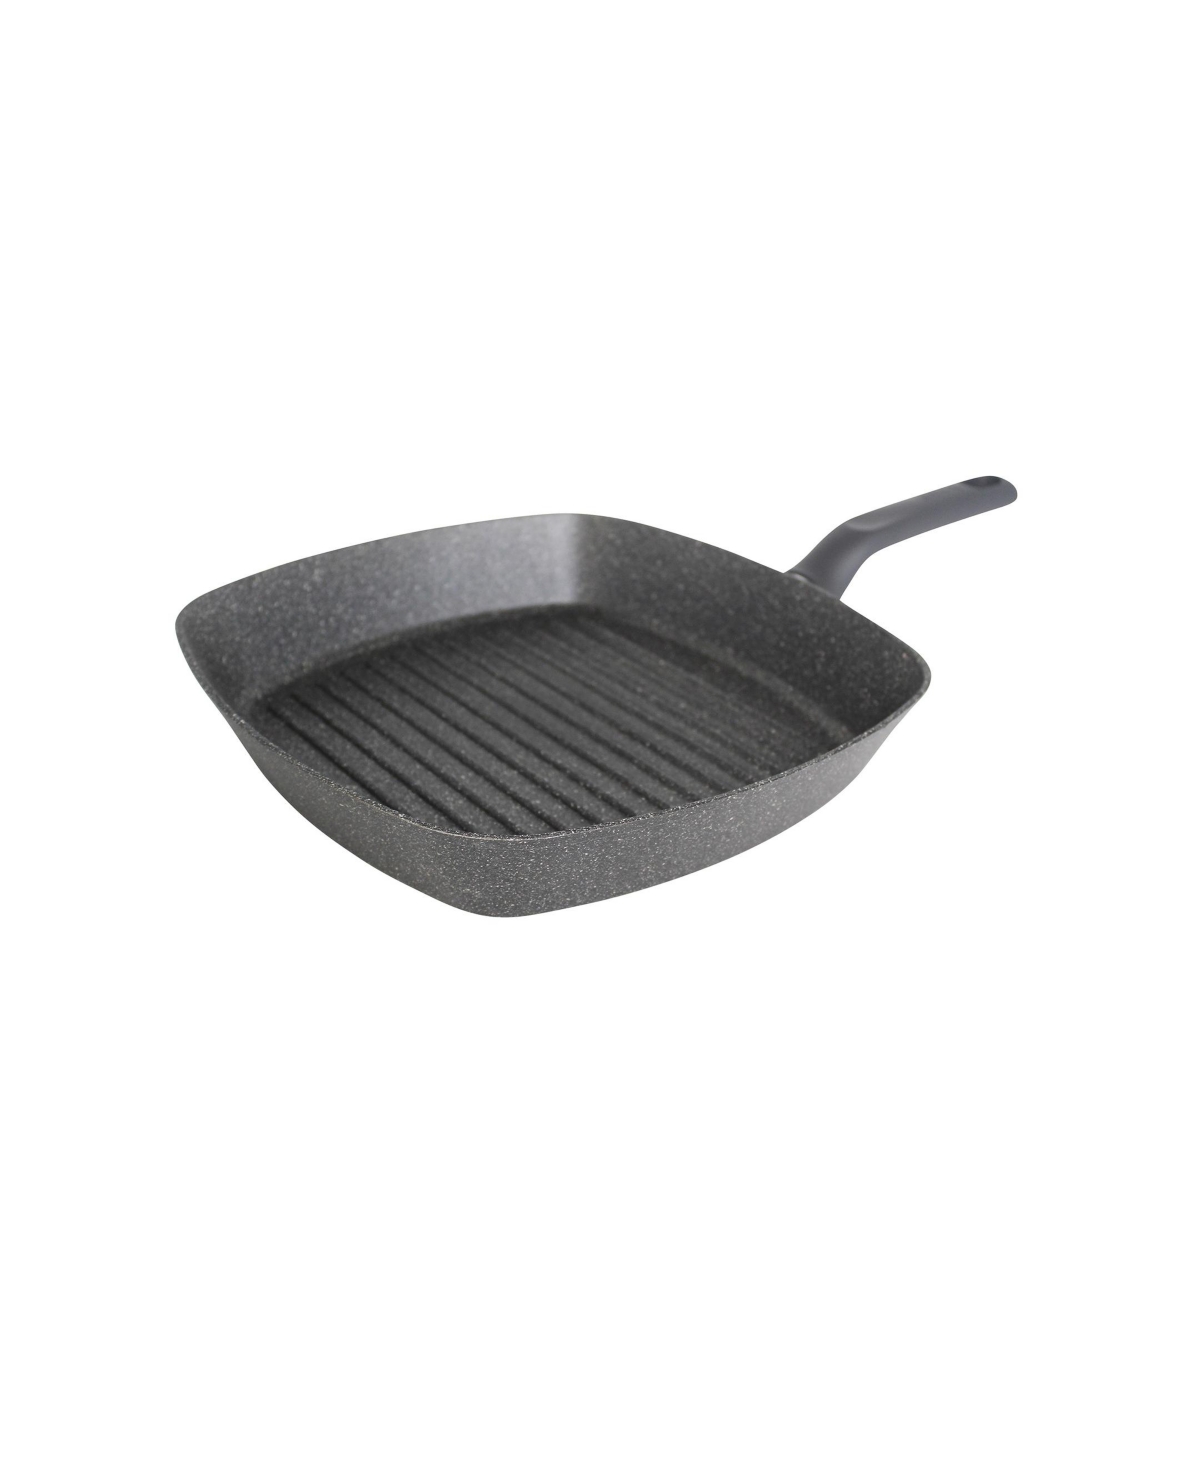 Imusa Aluminum 11" Deep Square Grill In Gray Speckled